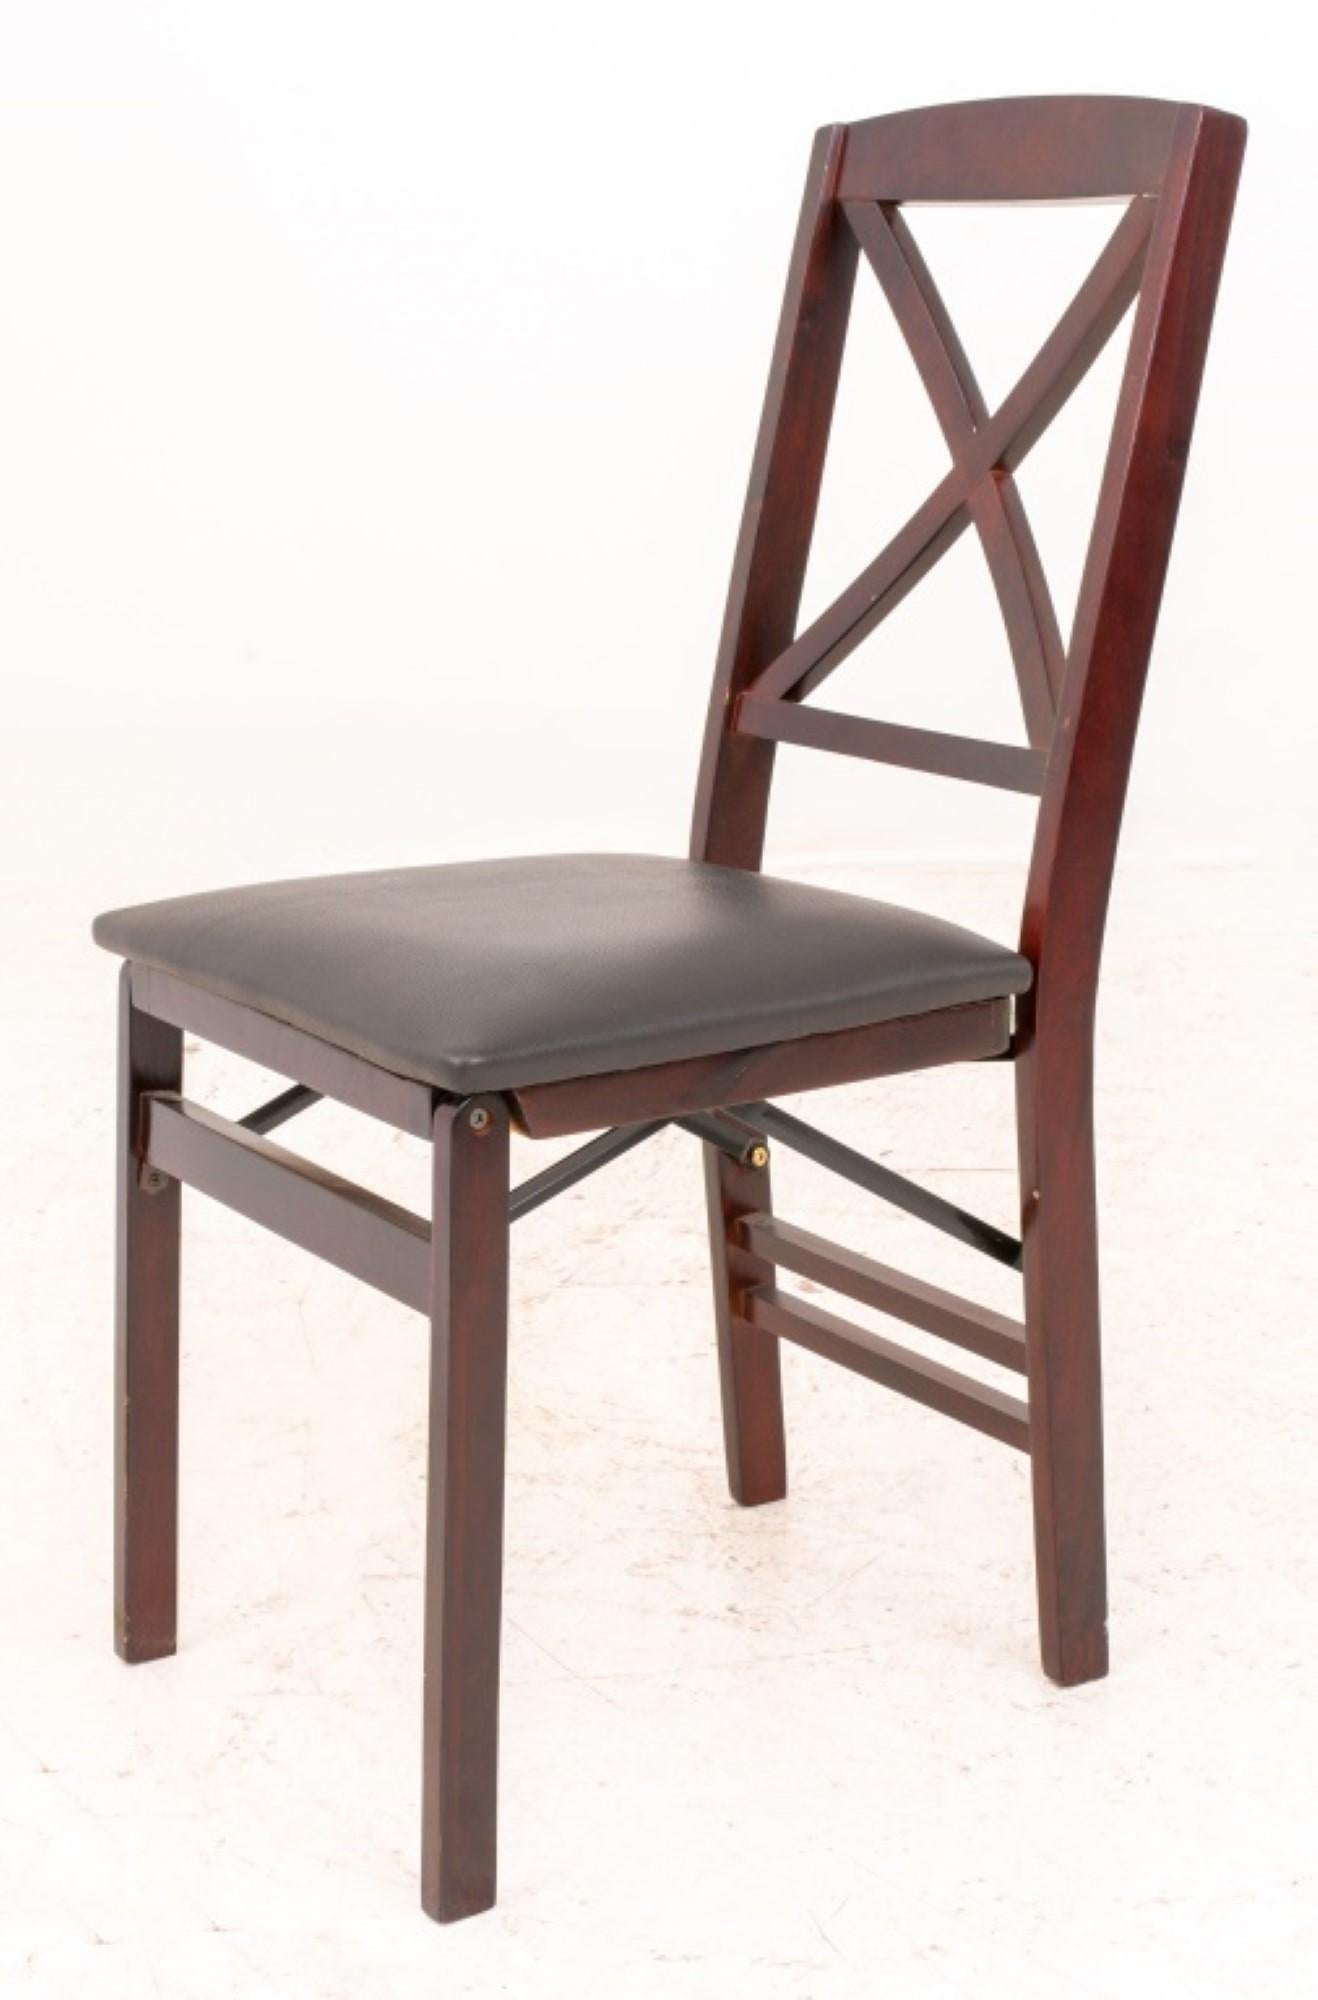 Upholstery Neoclassical Upholstered Mahogany Folding Chair 12 For Sale